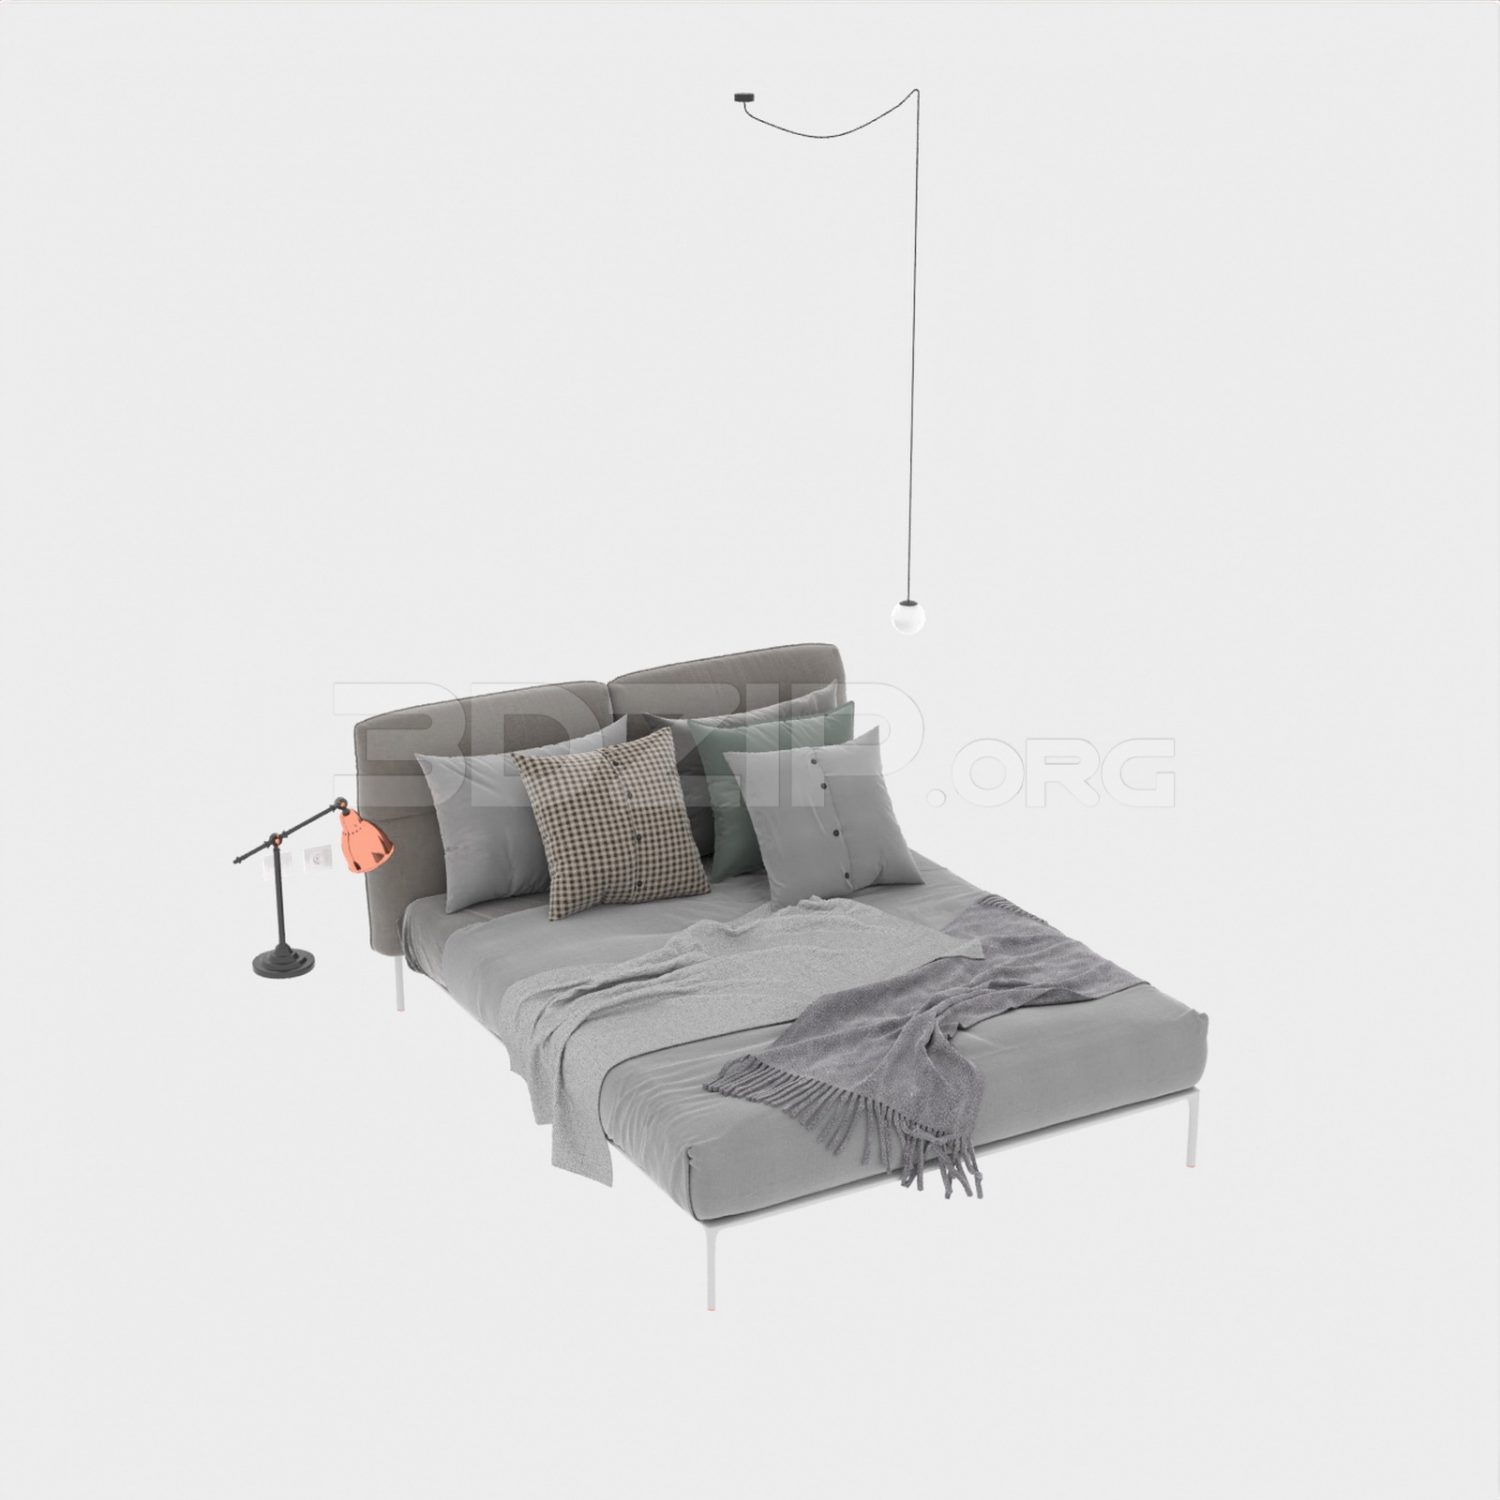 10567. Download Free Bed Model By Nguyen The Dinh